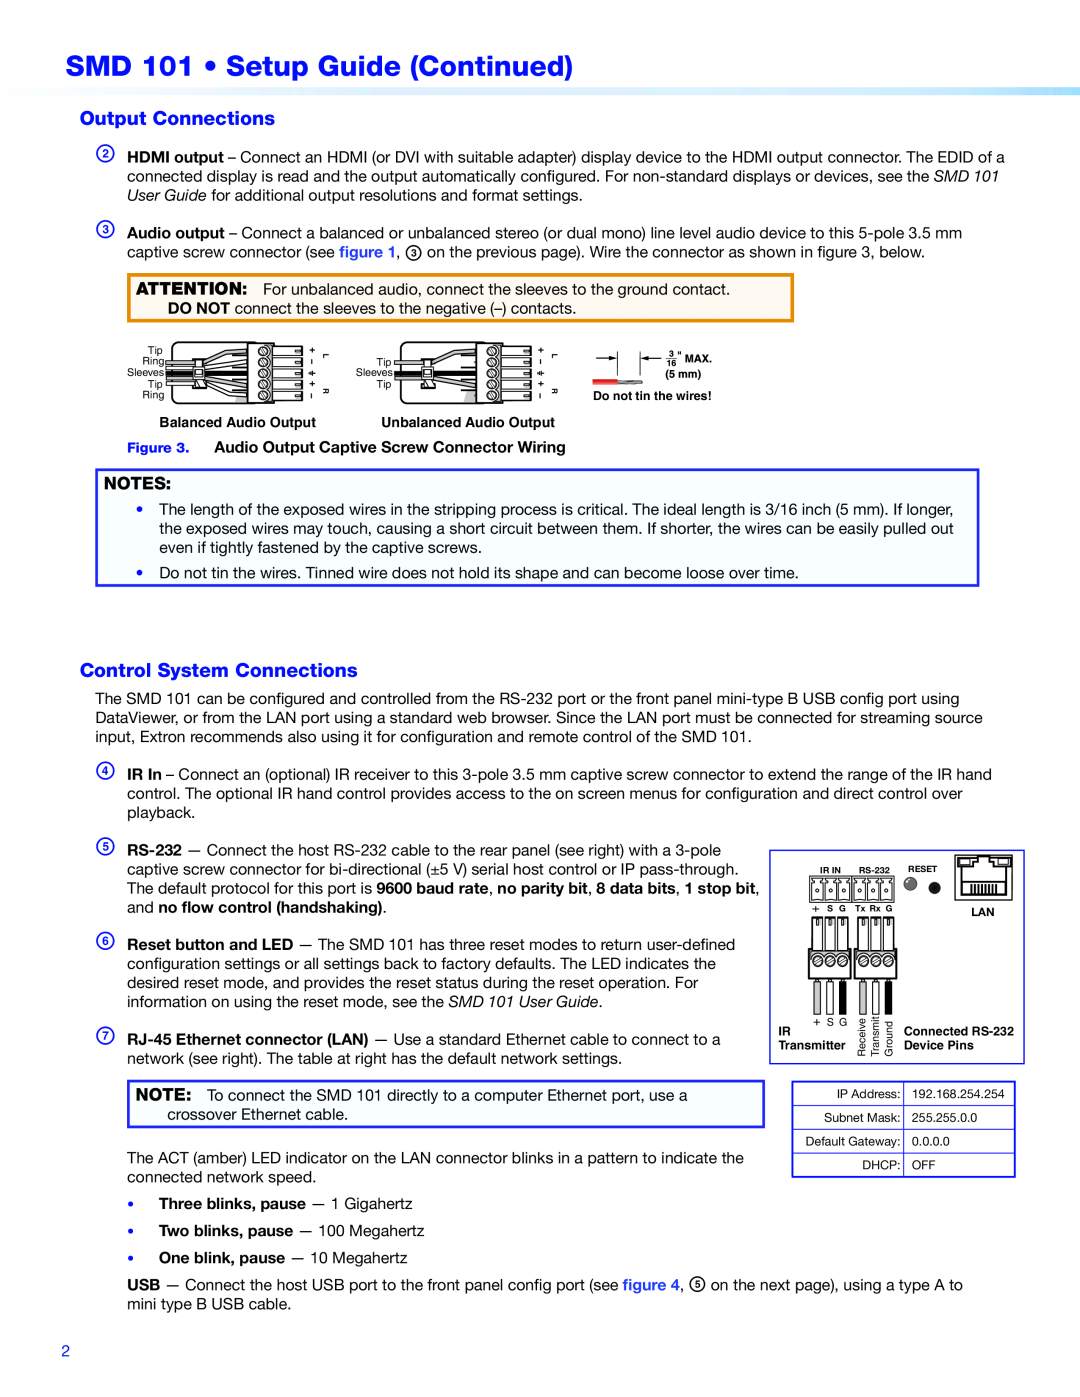 Extron electronic setup guide SMD 101 Setup Guide Continued, Output Connections, Control System Connections 